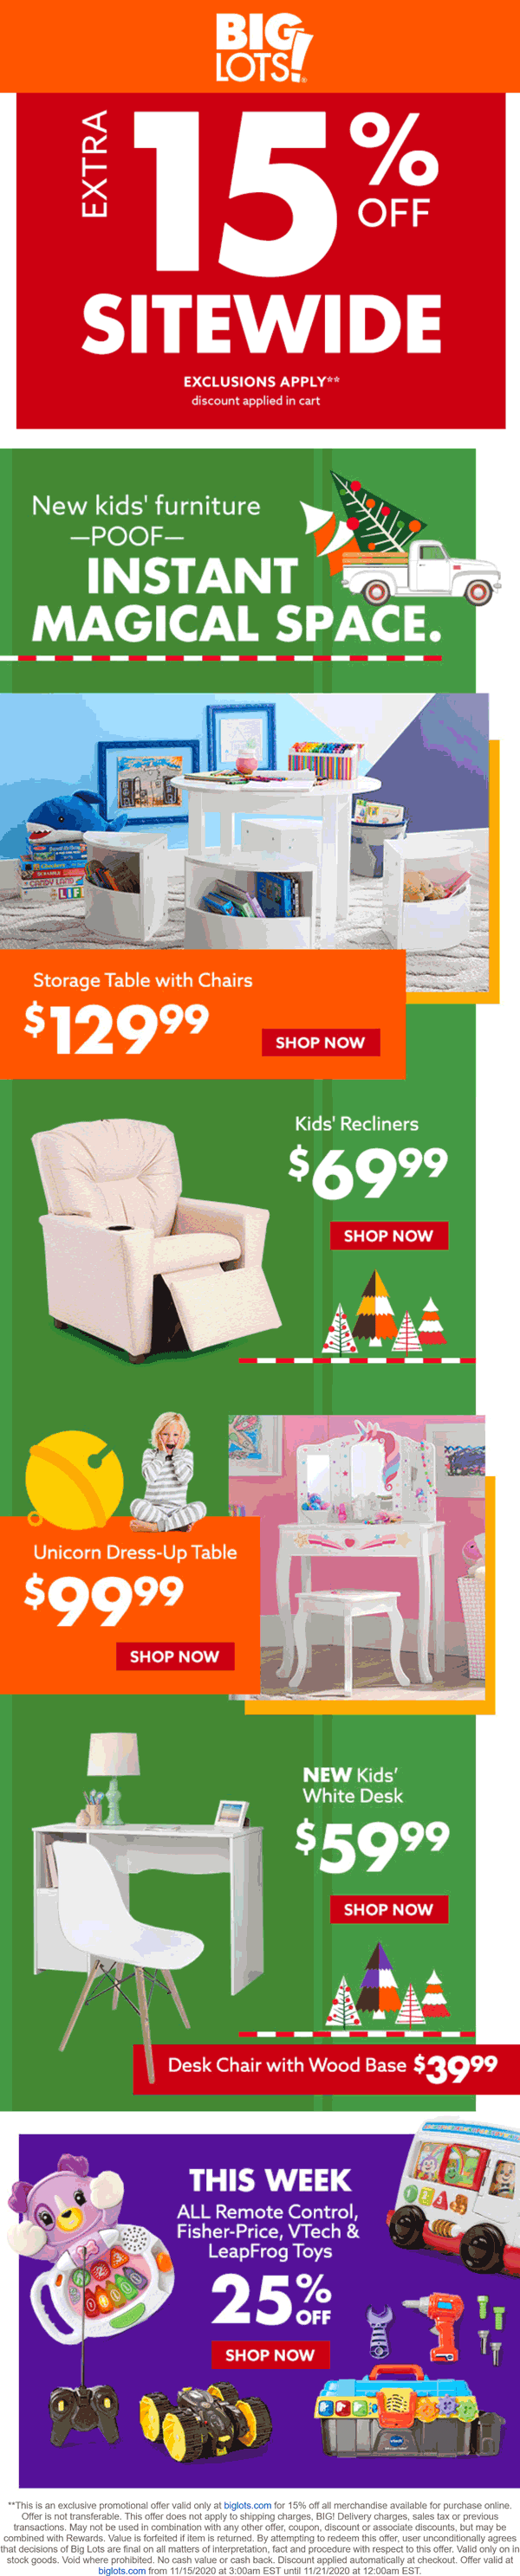 Big Lots stores Coupon  15% off everything online at Big Lots #biglots 